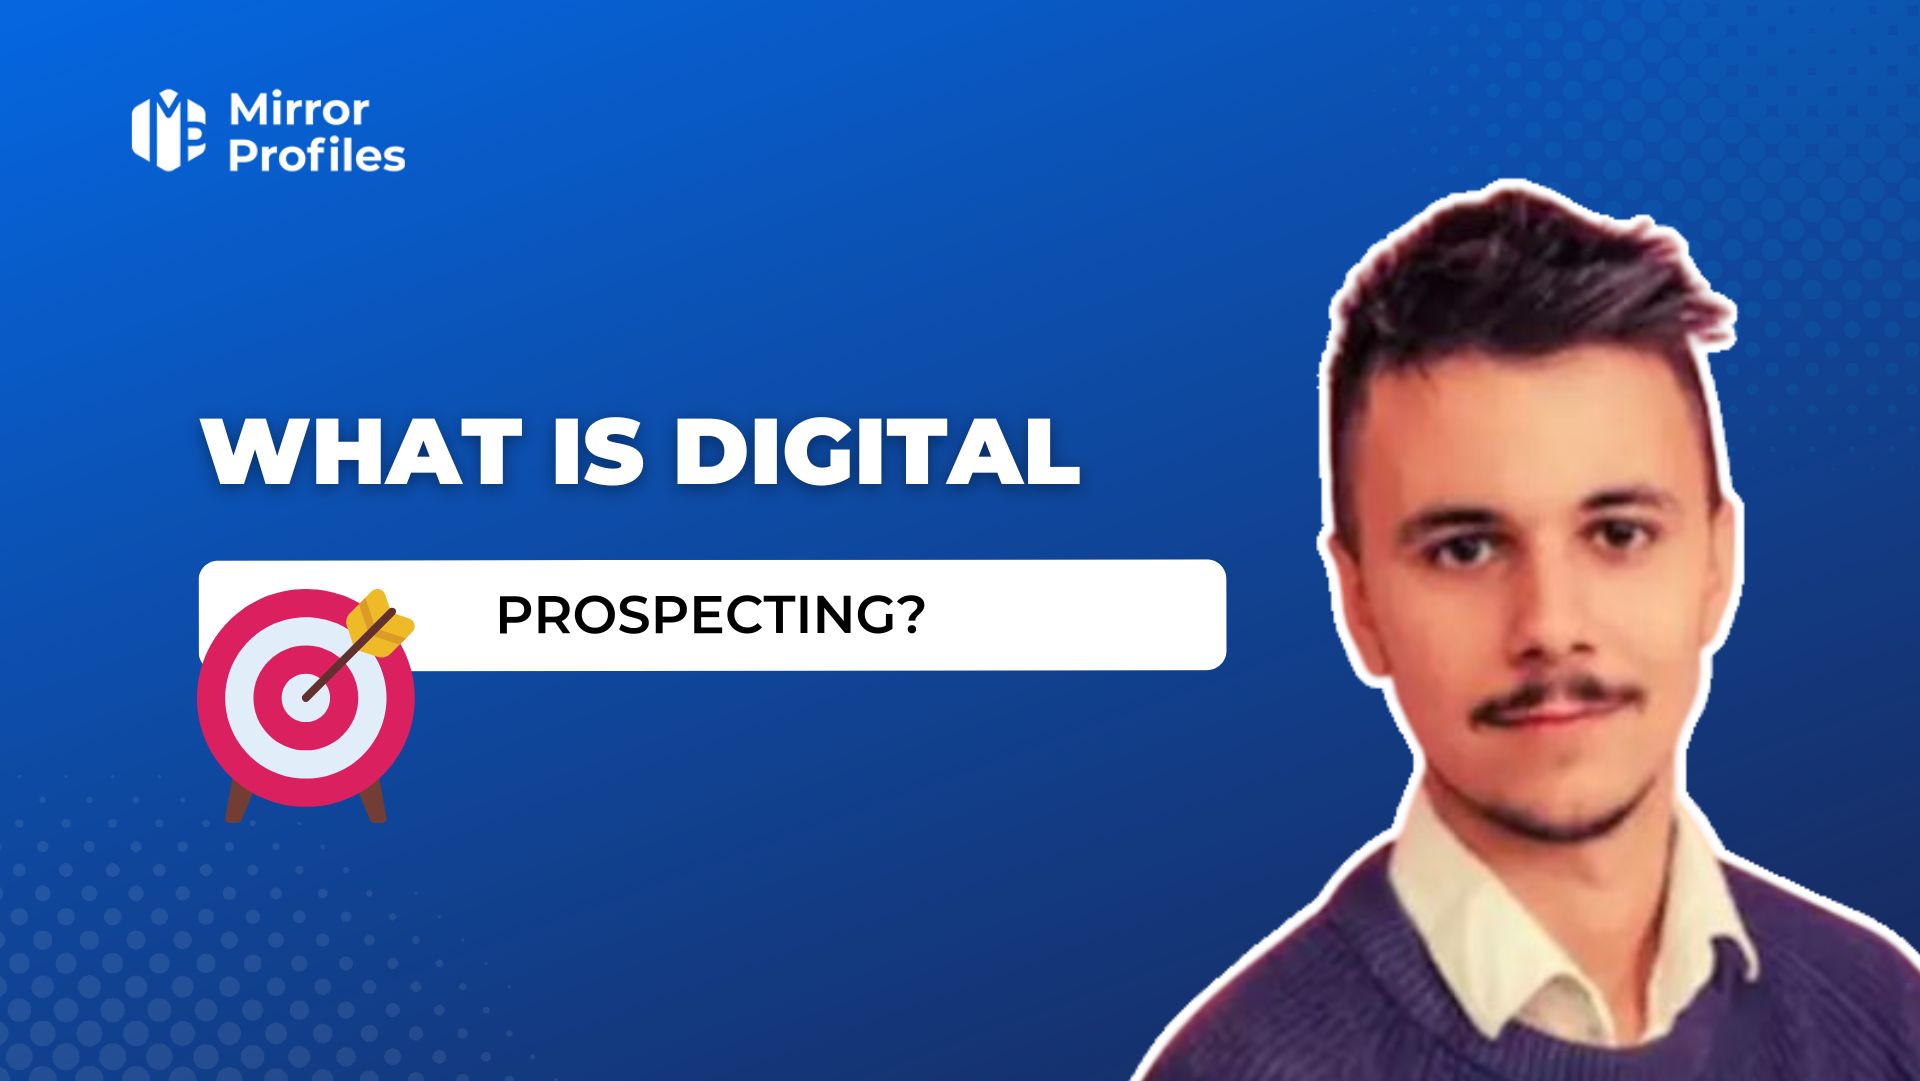 What is digital prospecting?